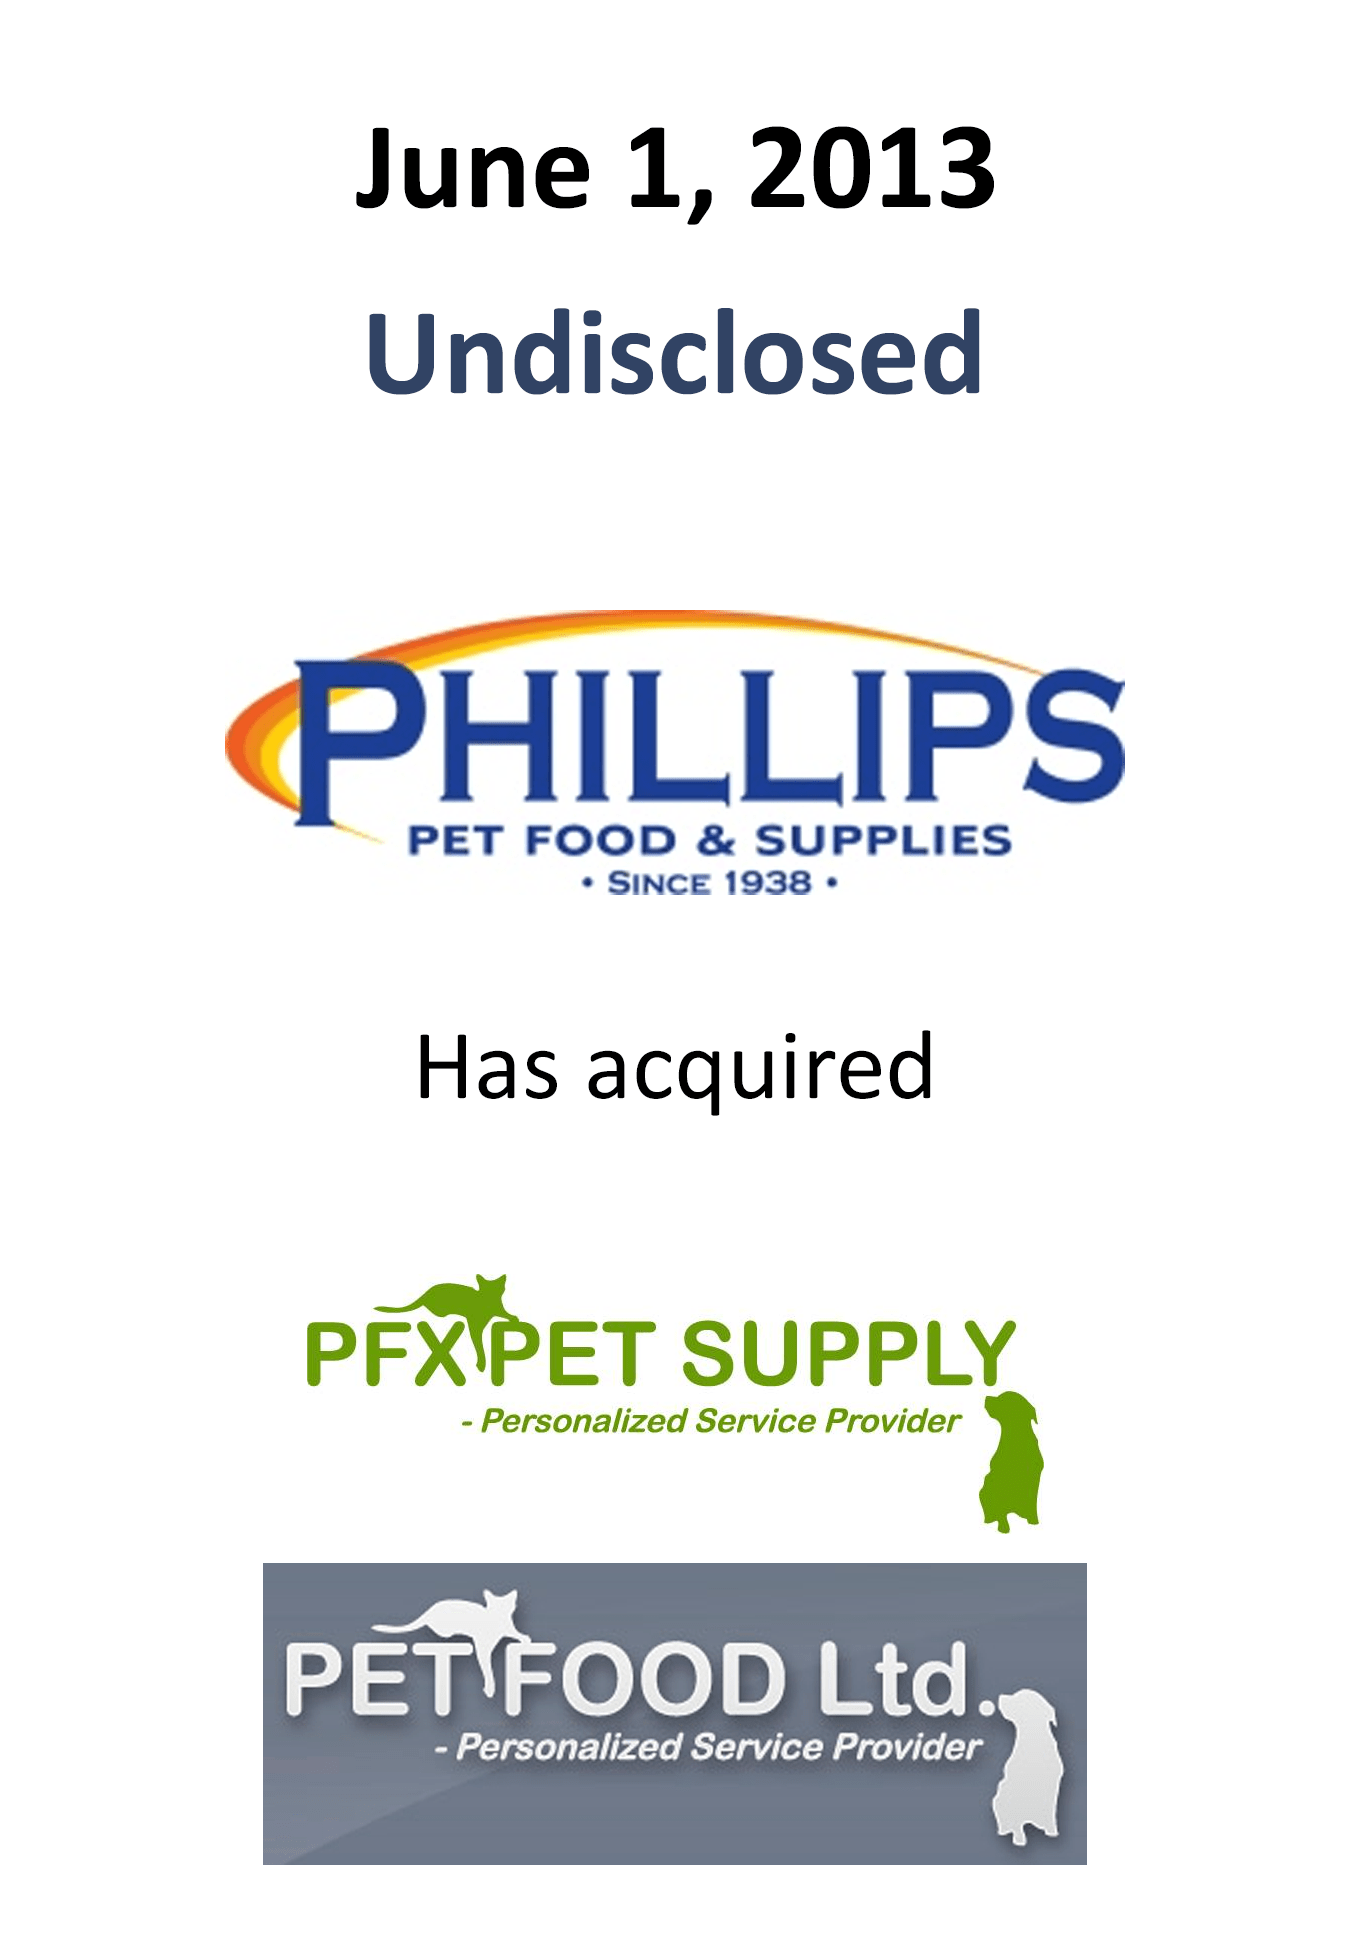 Phillips Supply Logo - Mergers & Acquisitions: Phillips Pet Food & Supplies has acquired